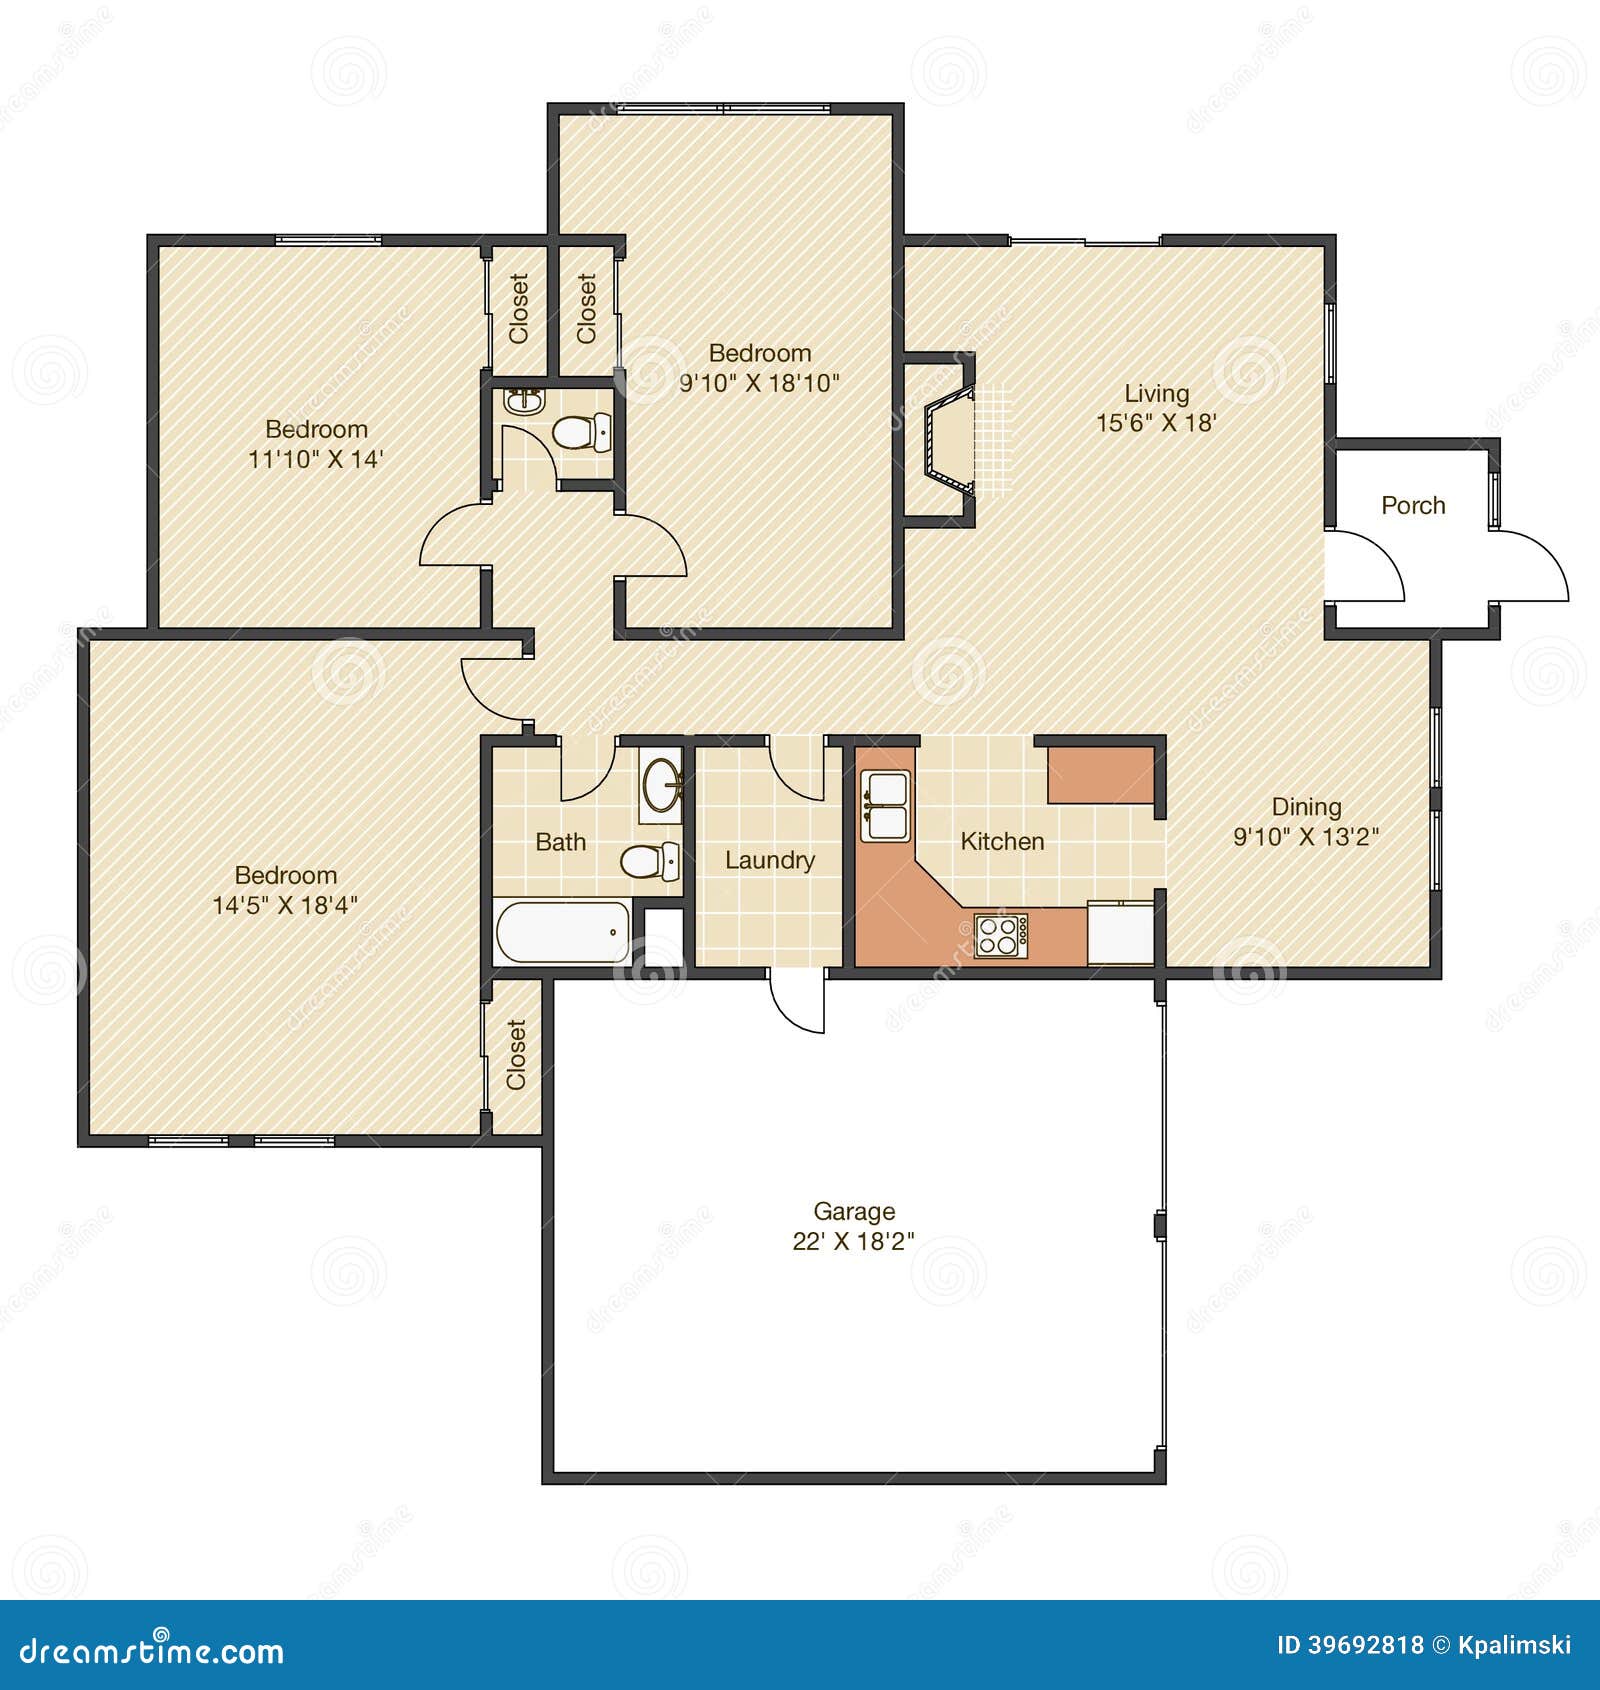  House  Plan  With Measurements  Stock Illustration Image 